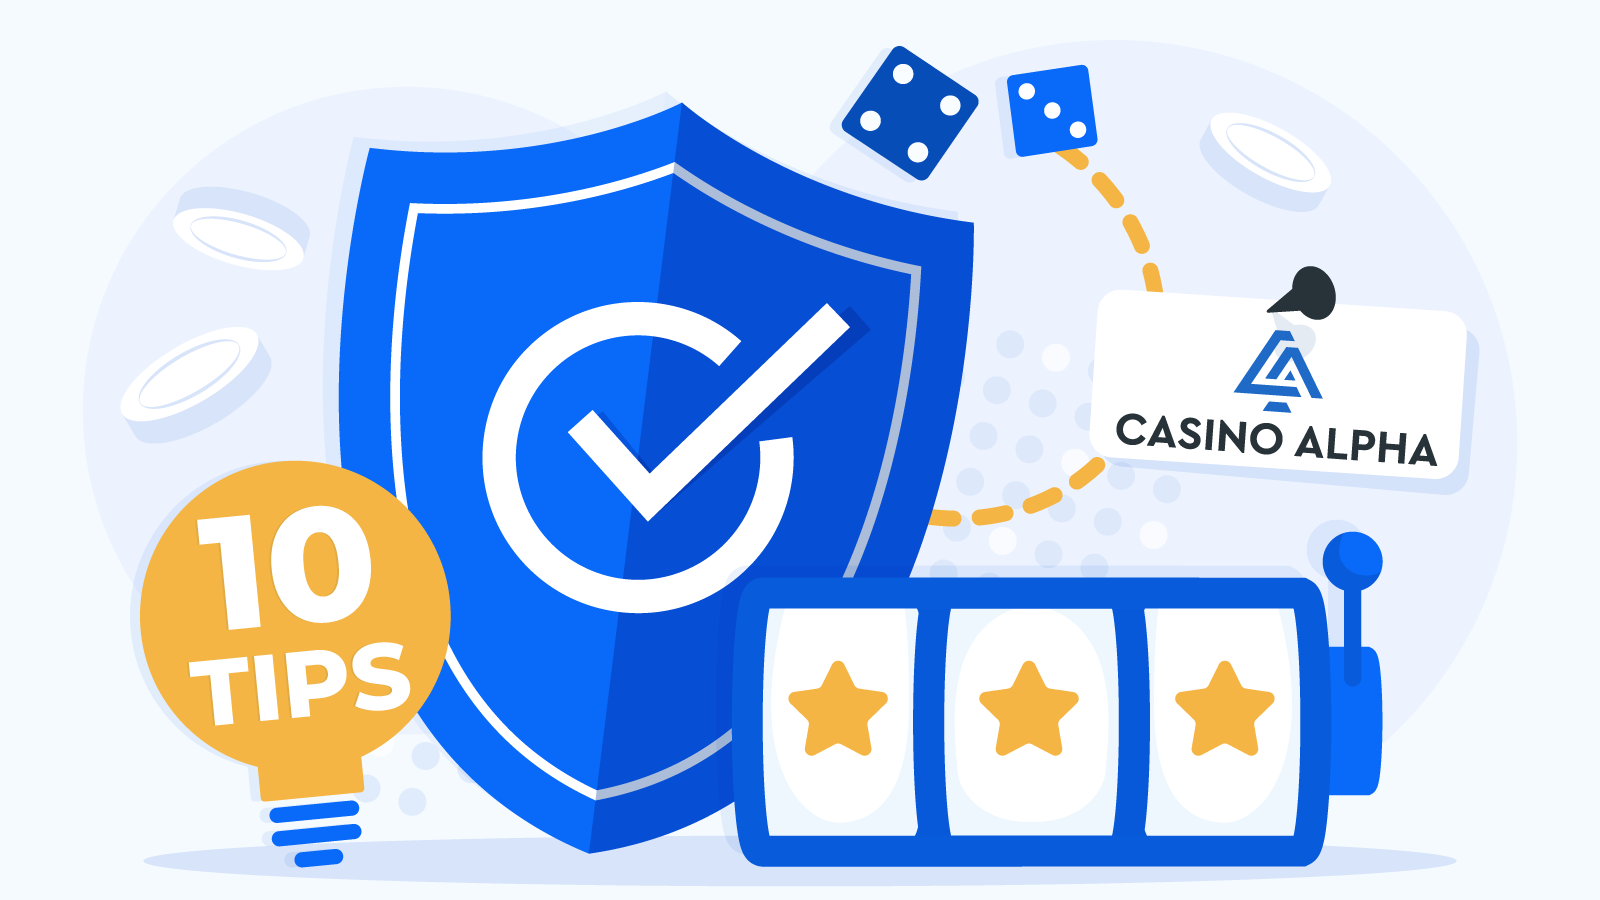 How to Pick Safe Online Casinos: 10 Tips by CasinoAlpha Experts